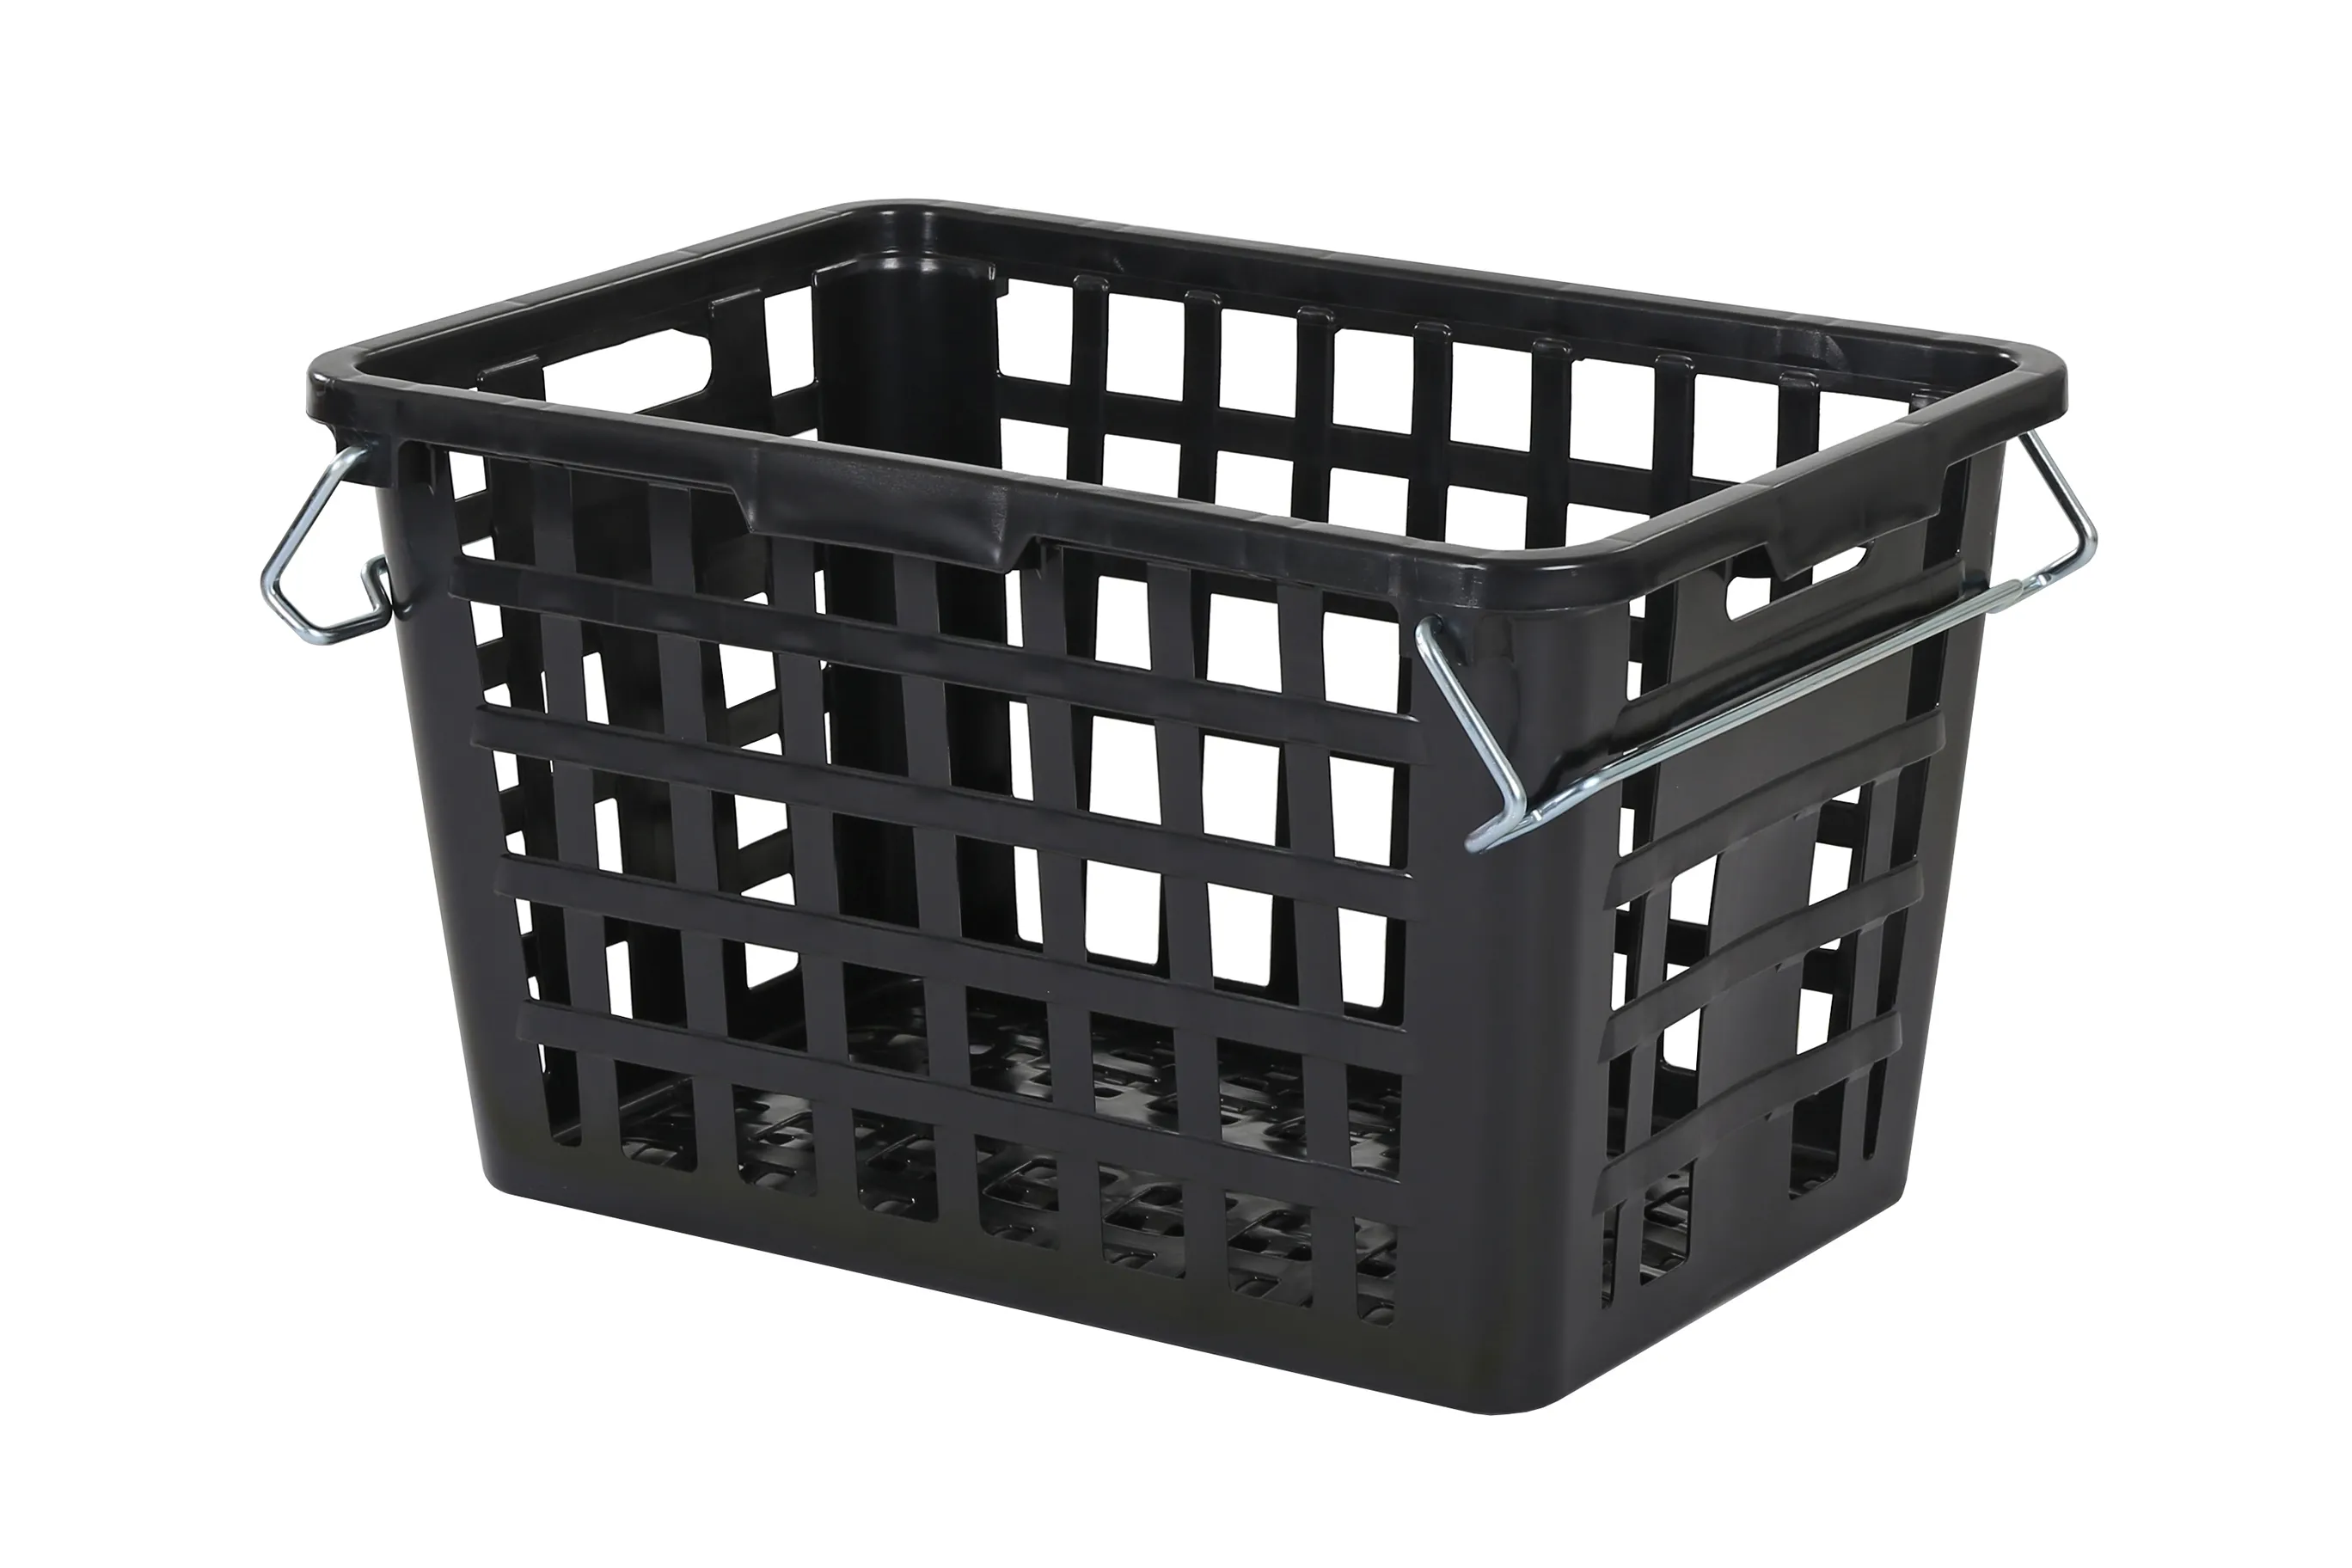 Stacking nestable crate - Washing / textile basket with handles - 795 x 545 x H 457 mm